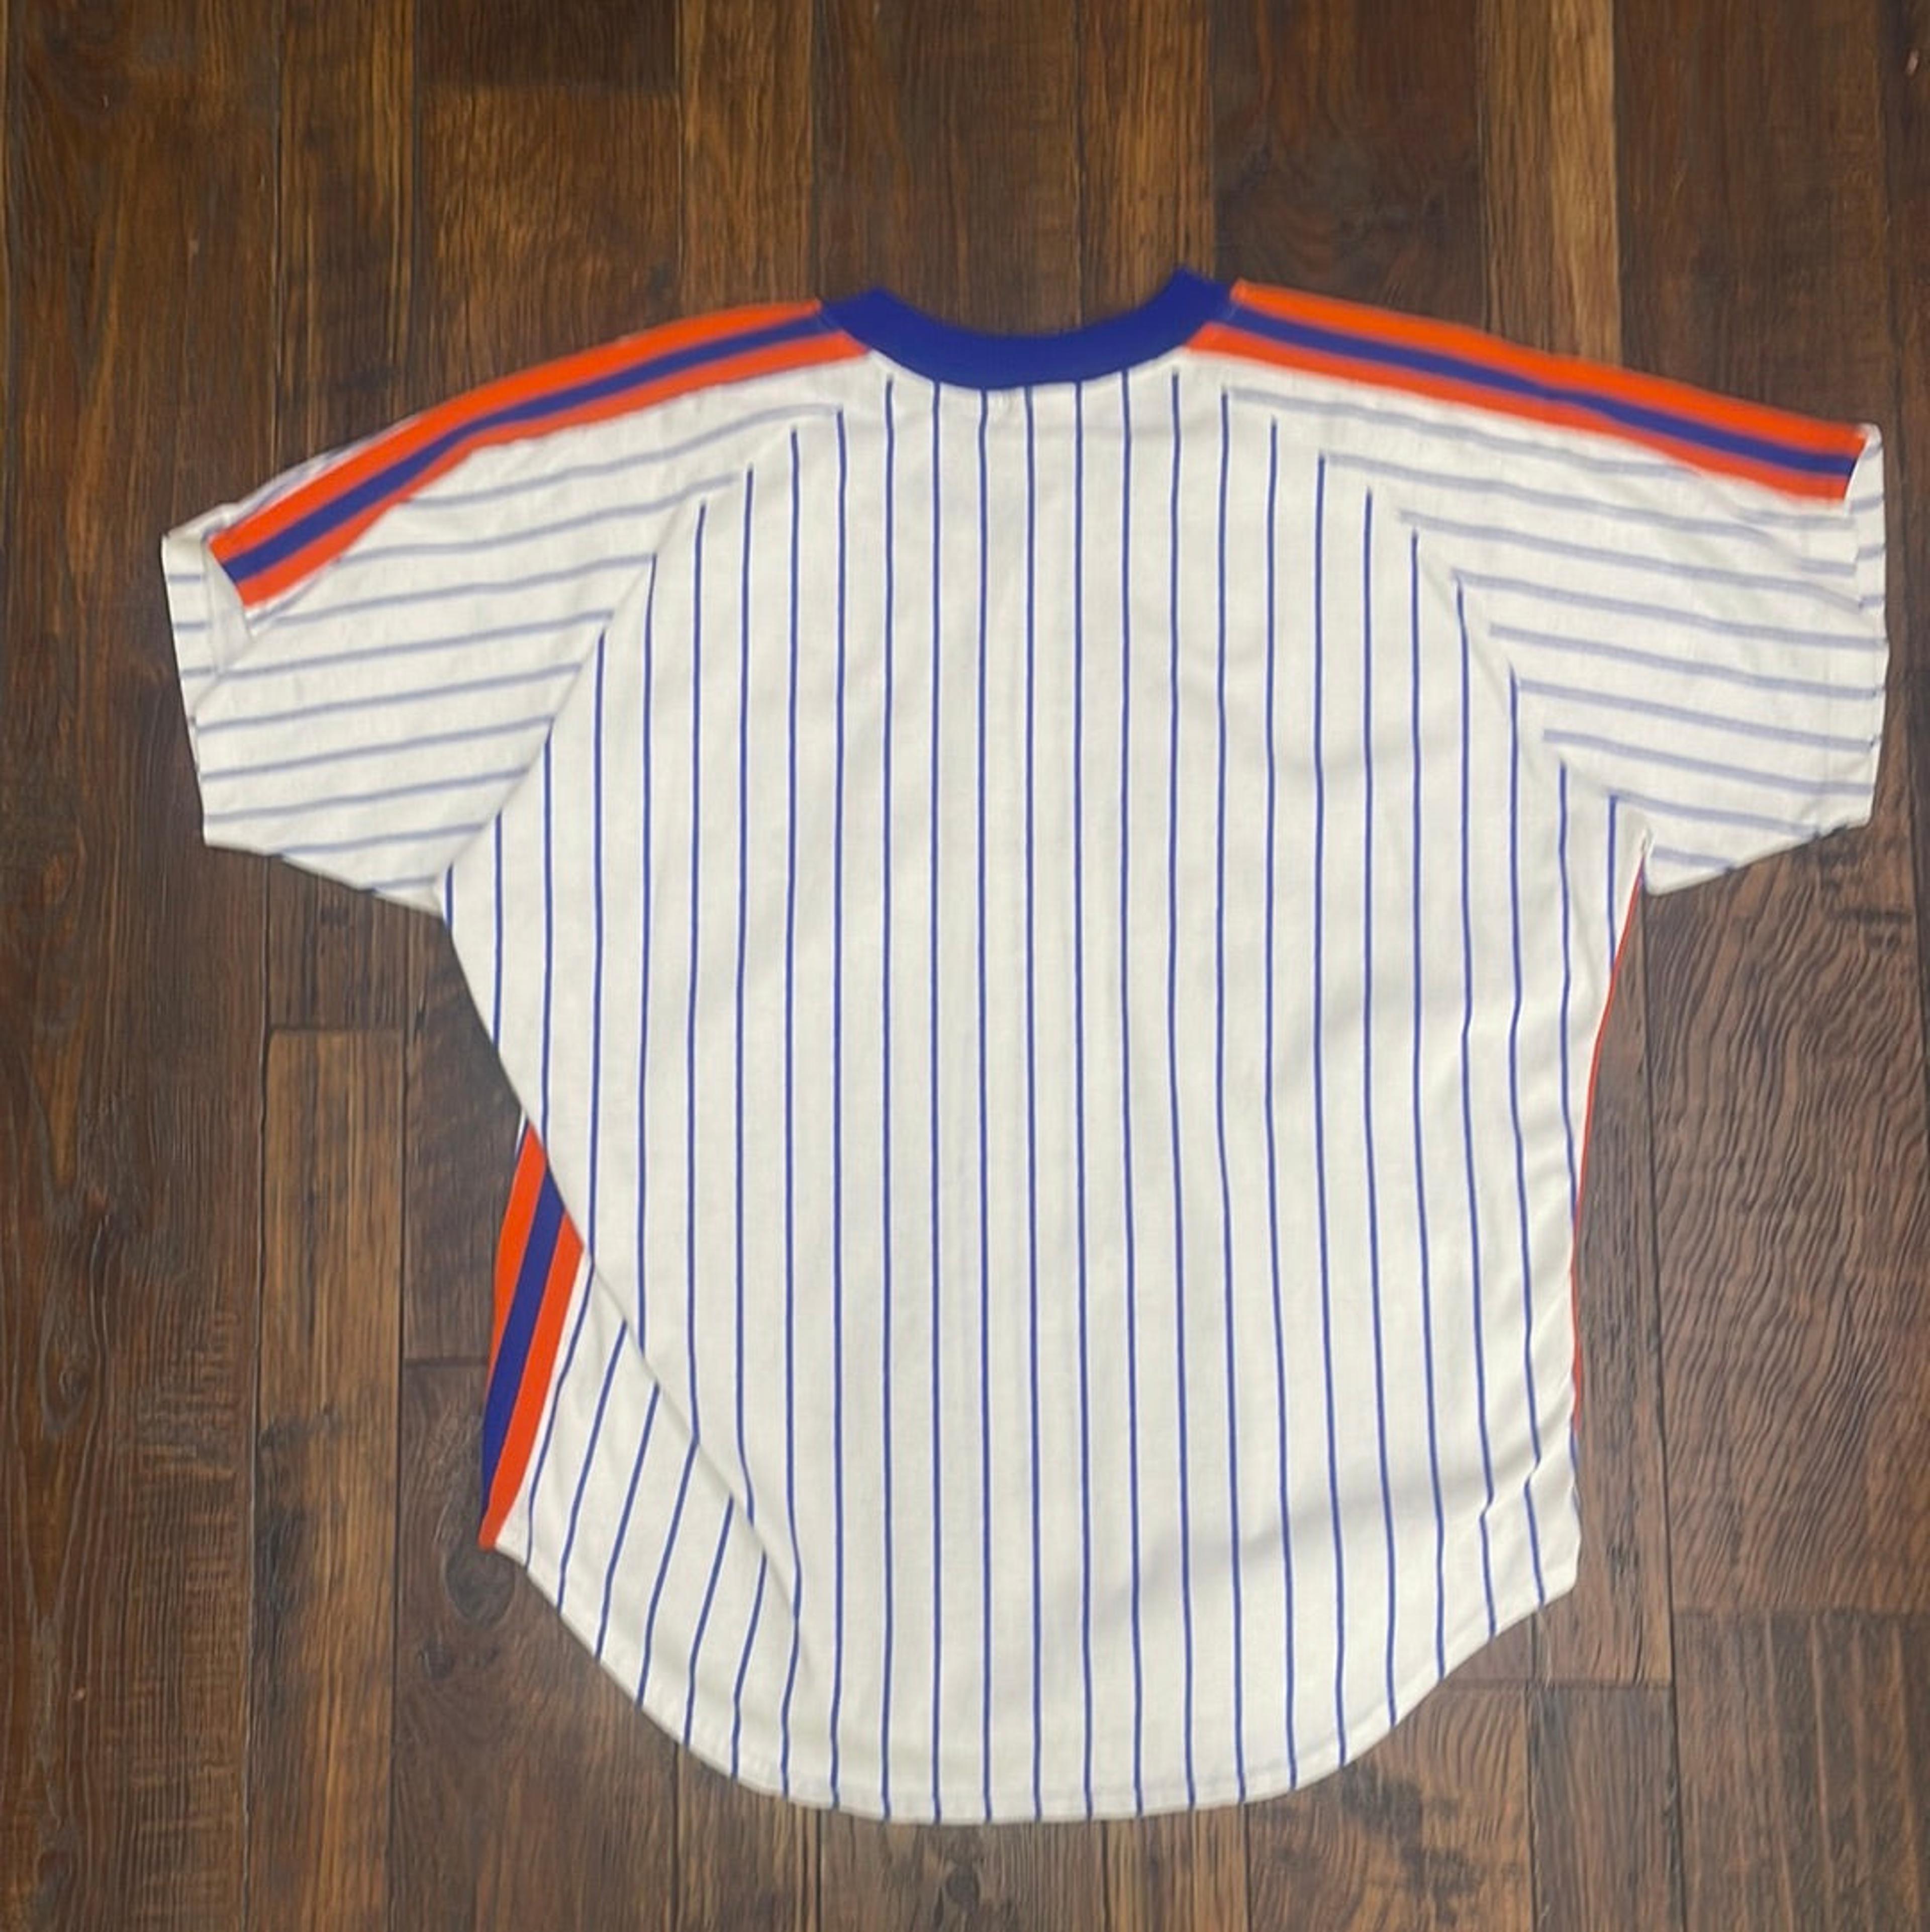 Alternate View 5 of Vintage 1980s MLB New York Mets Rawlings Jersey L